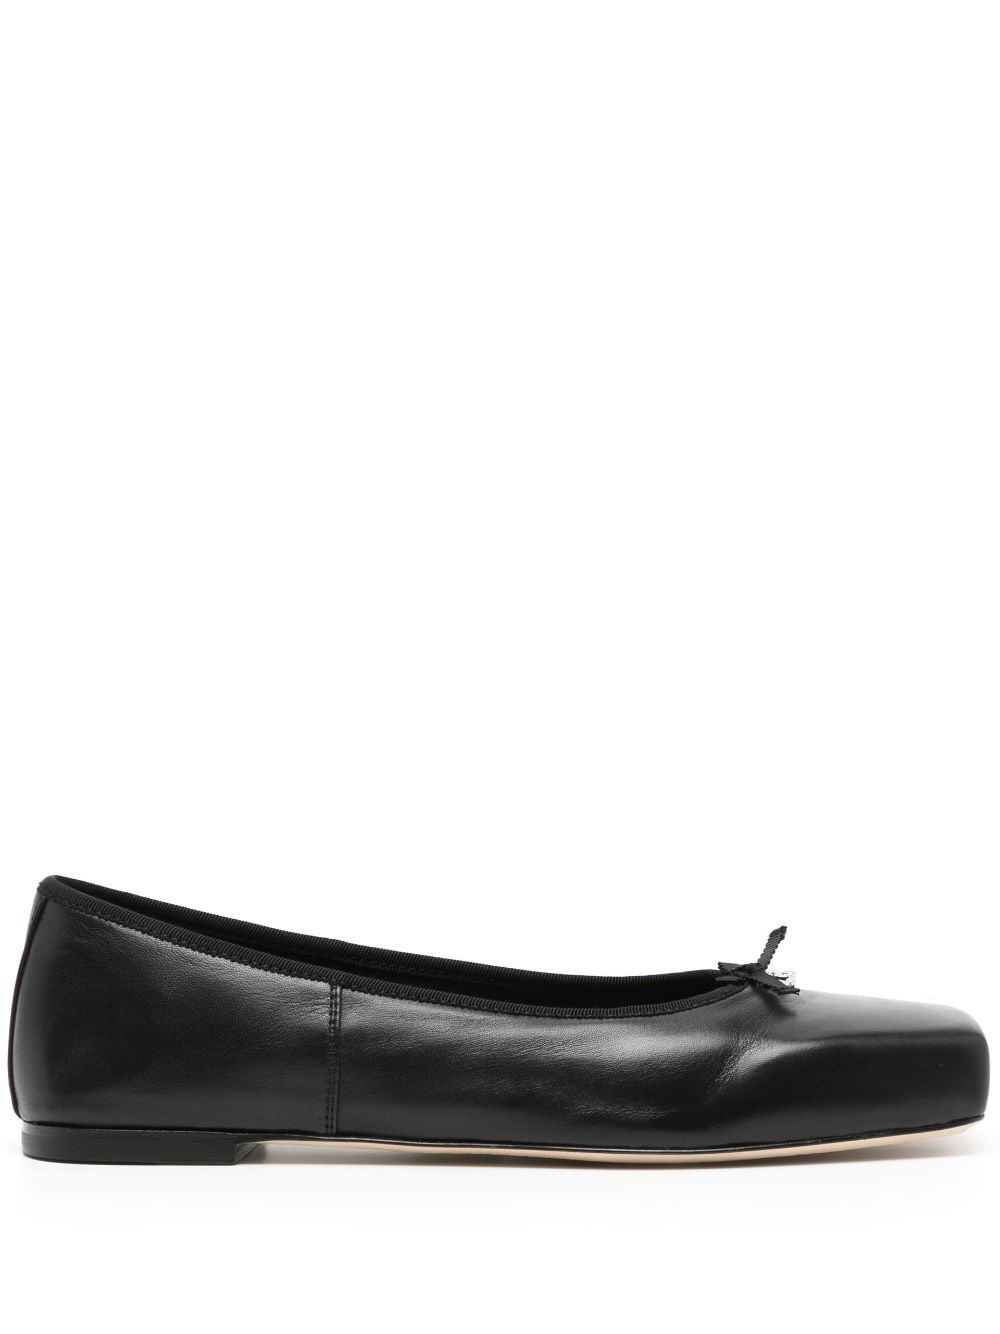 Shop Alexander Wang Square-toe Leather Ballerina Shoes In Black